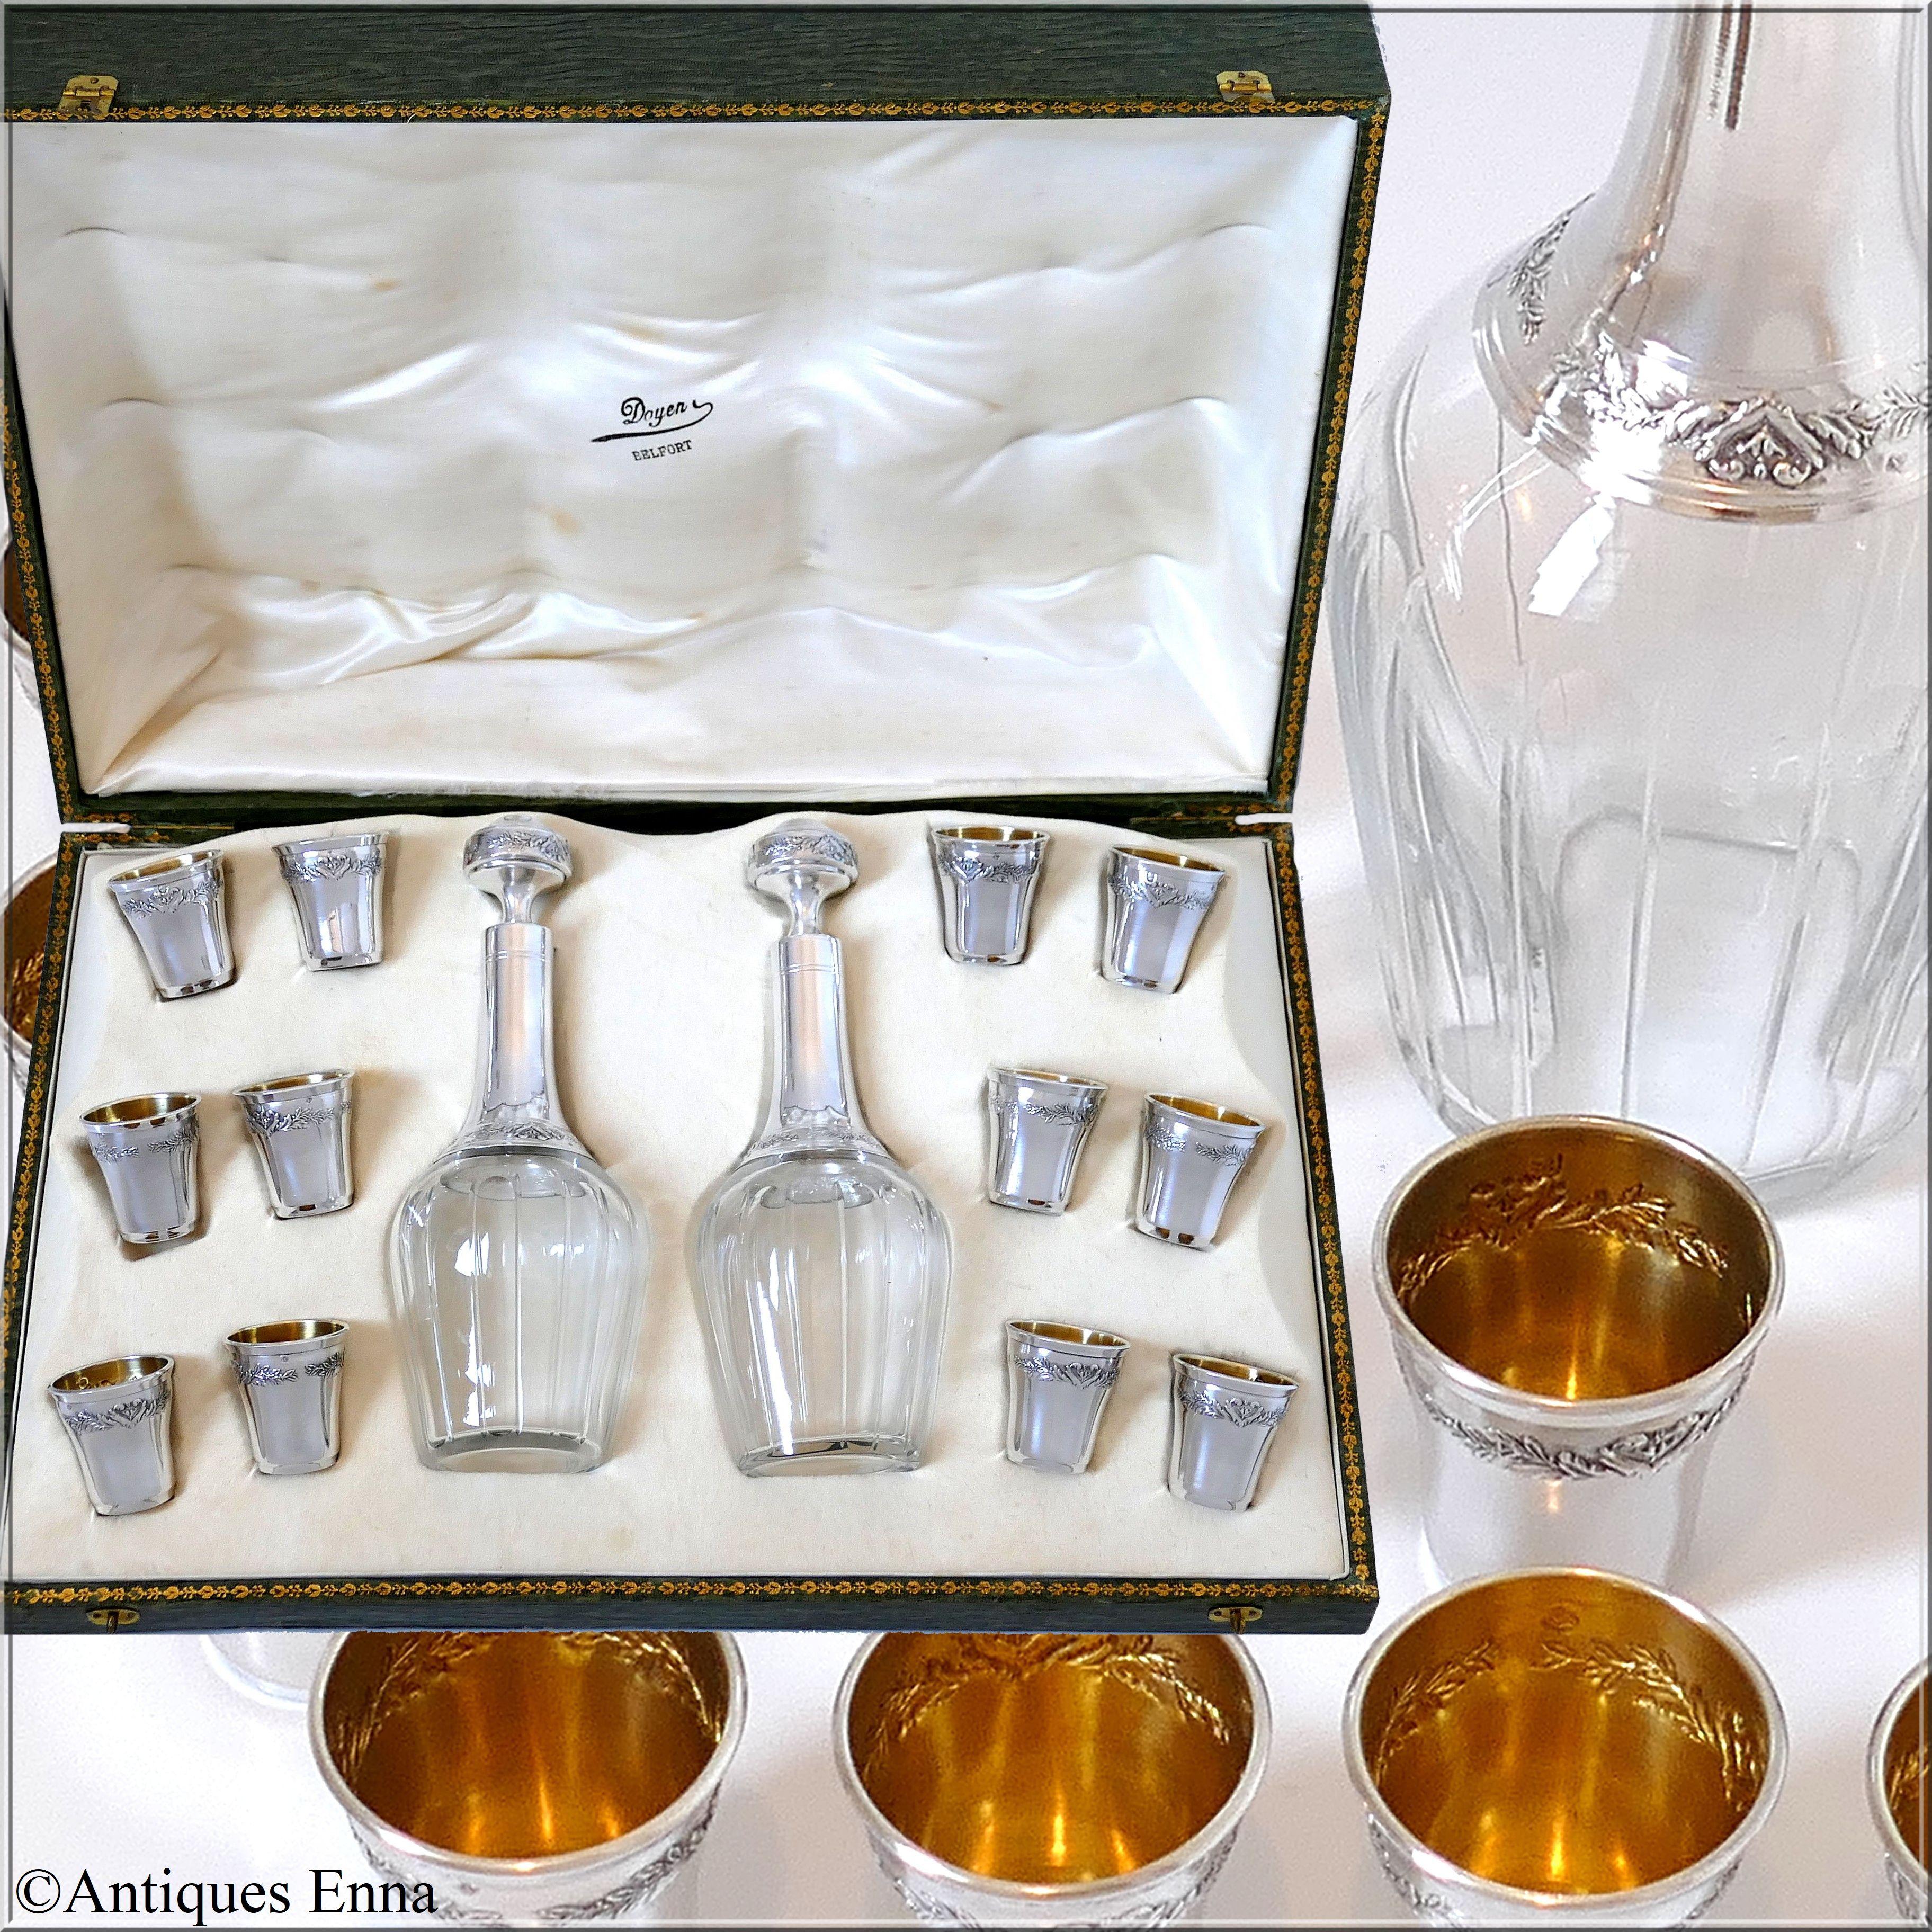 Head of Minerve 1st titre on the liquor cups and on the decanters for 950/1000 French sterling silver Vermeil guarantee. The quality of the gold used to recover sterling silver is a minimum of 750 mils (18-carat).

Art Deco Period for this French